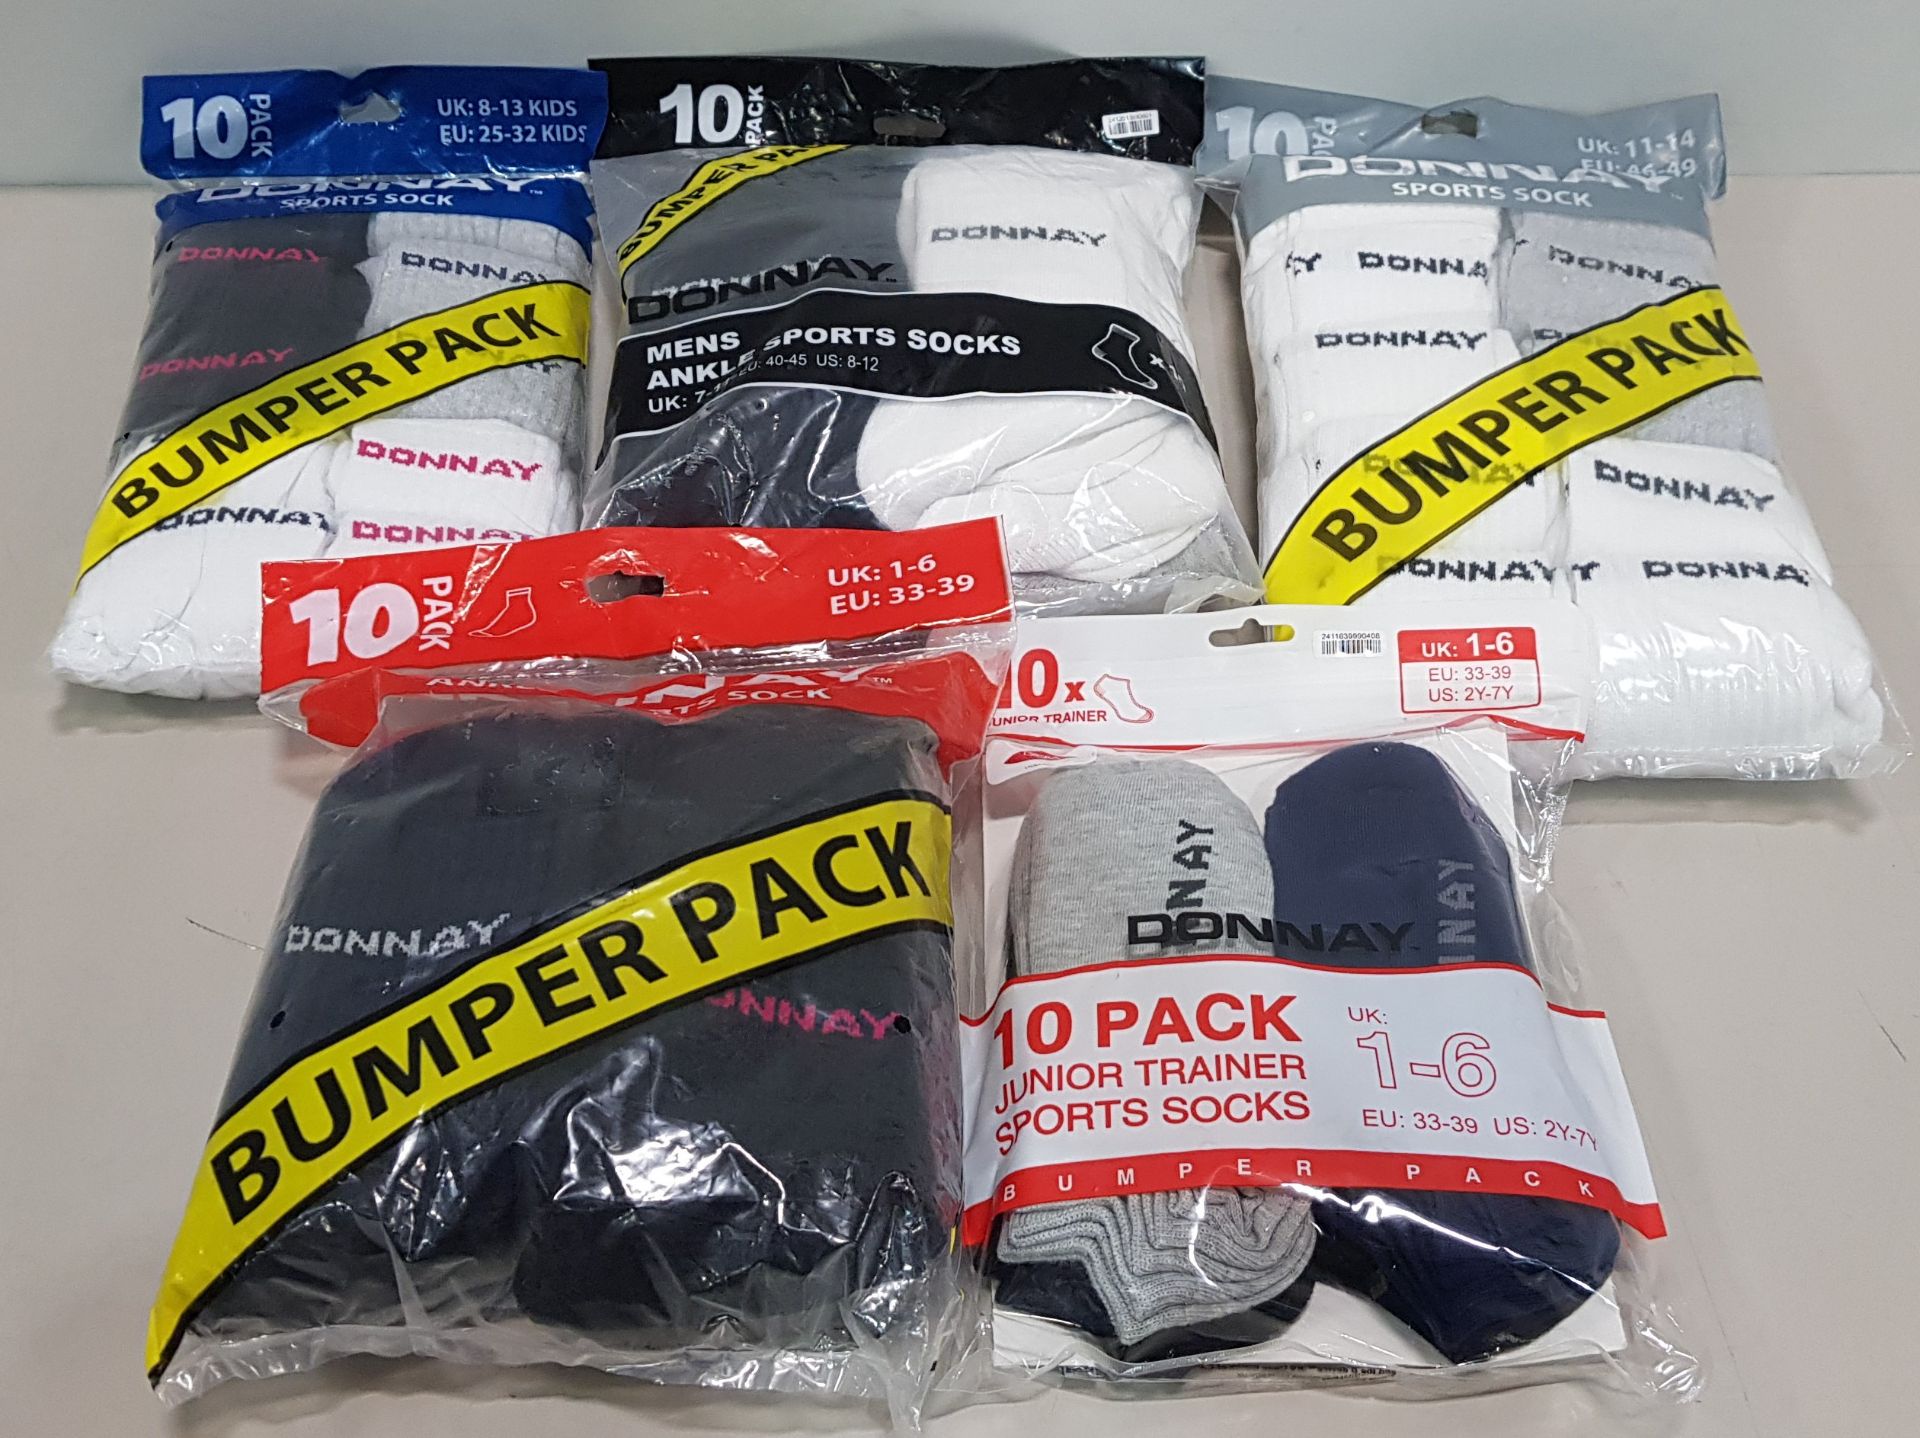 45 X BRAND NEW PACKS OF 10 PAIR OF DONNAY SPORT SOCKS IN VARIOUS STYLES, SIZES AND COLOURS IN 3